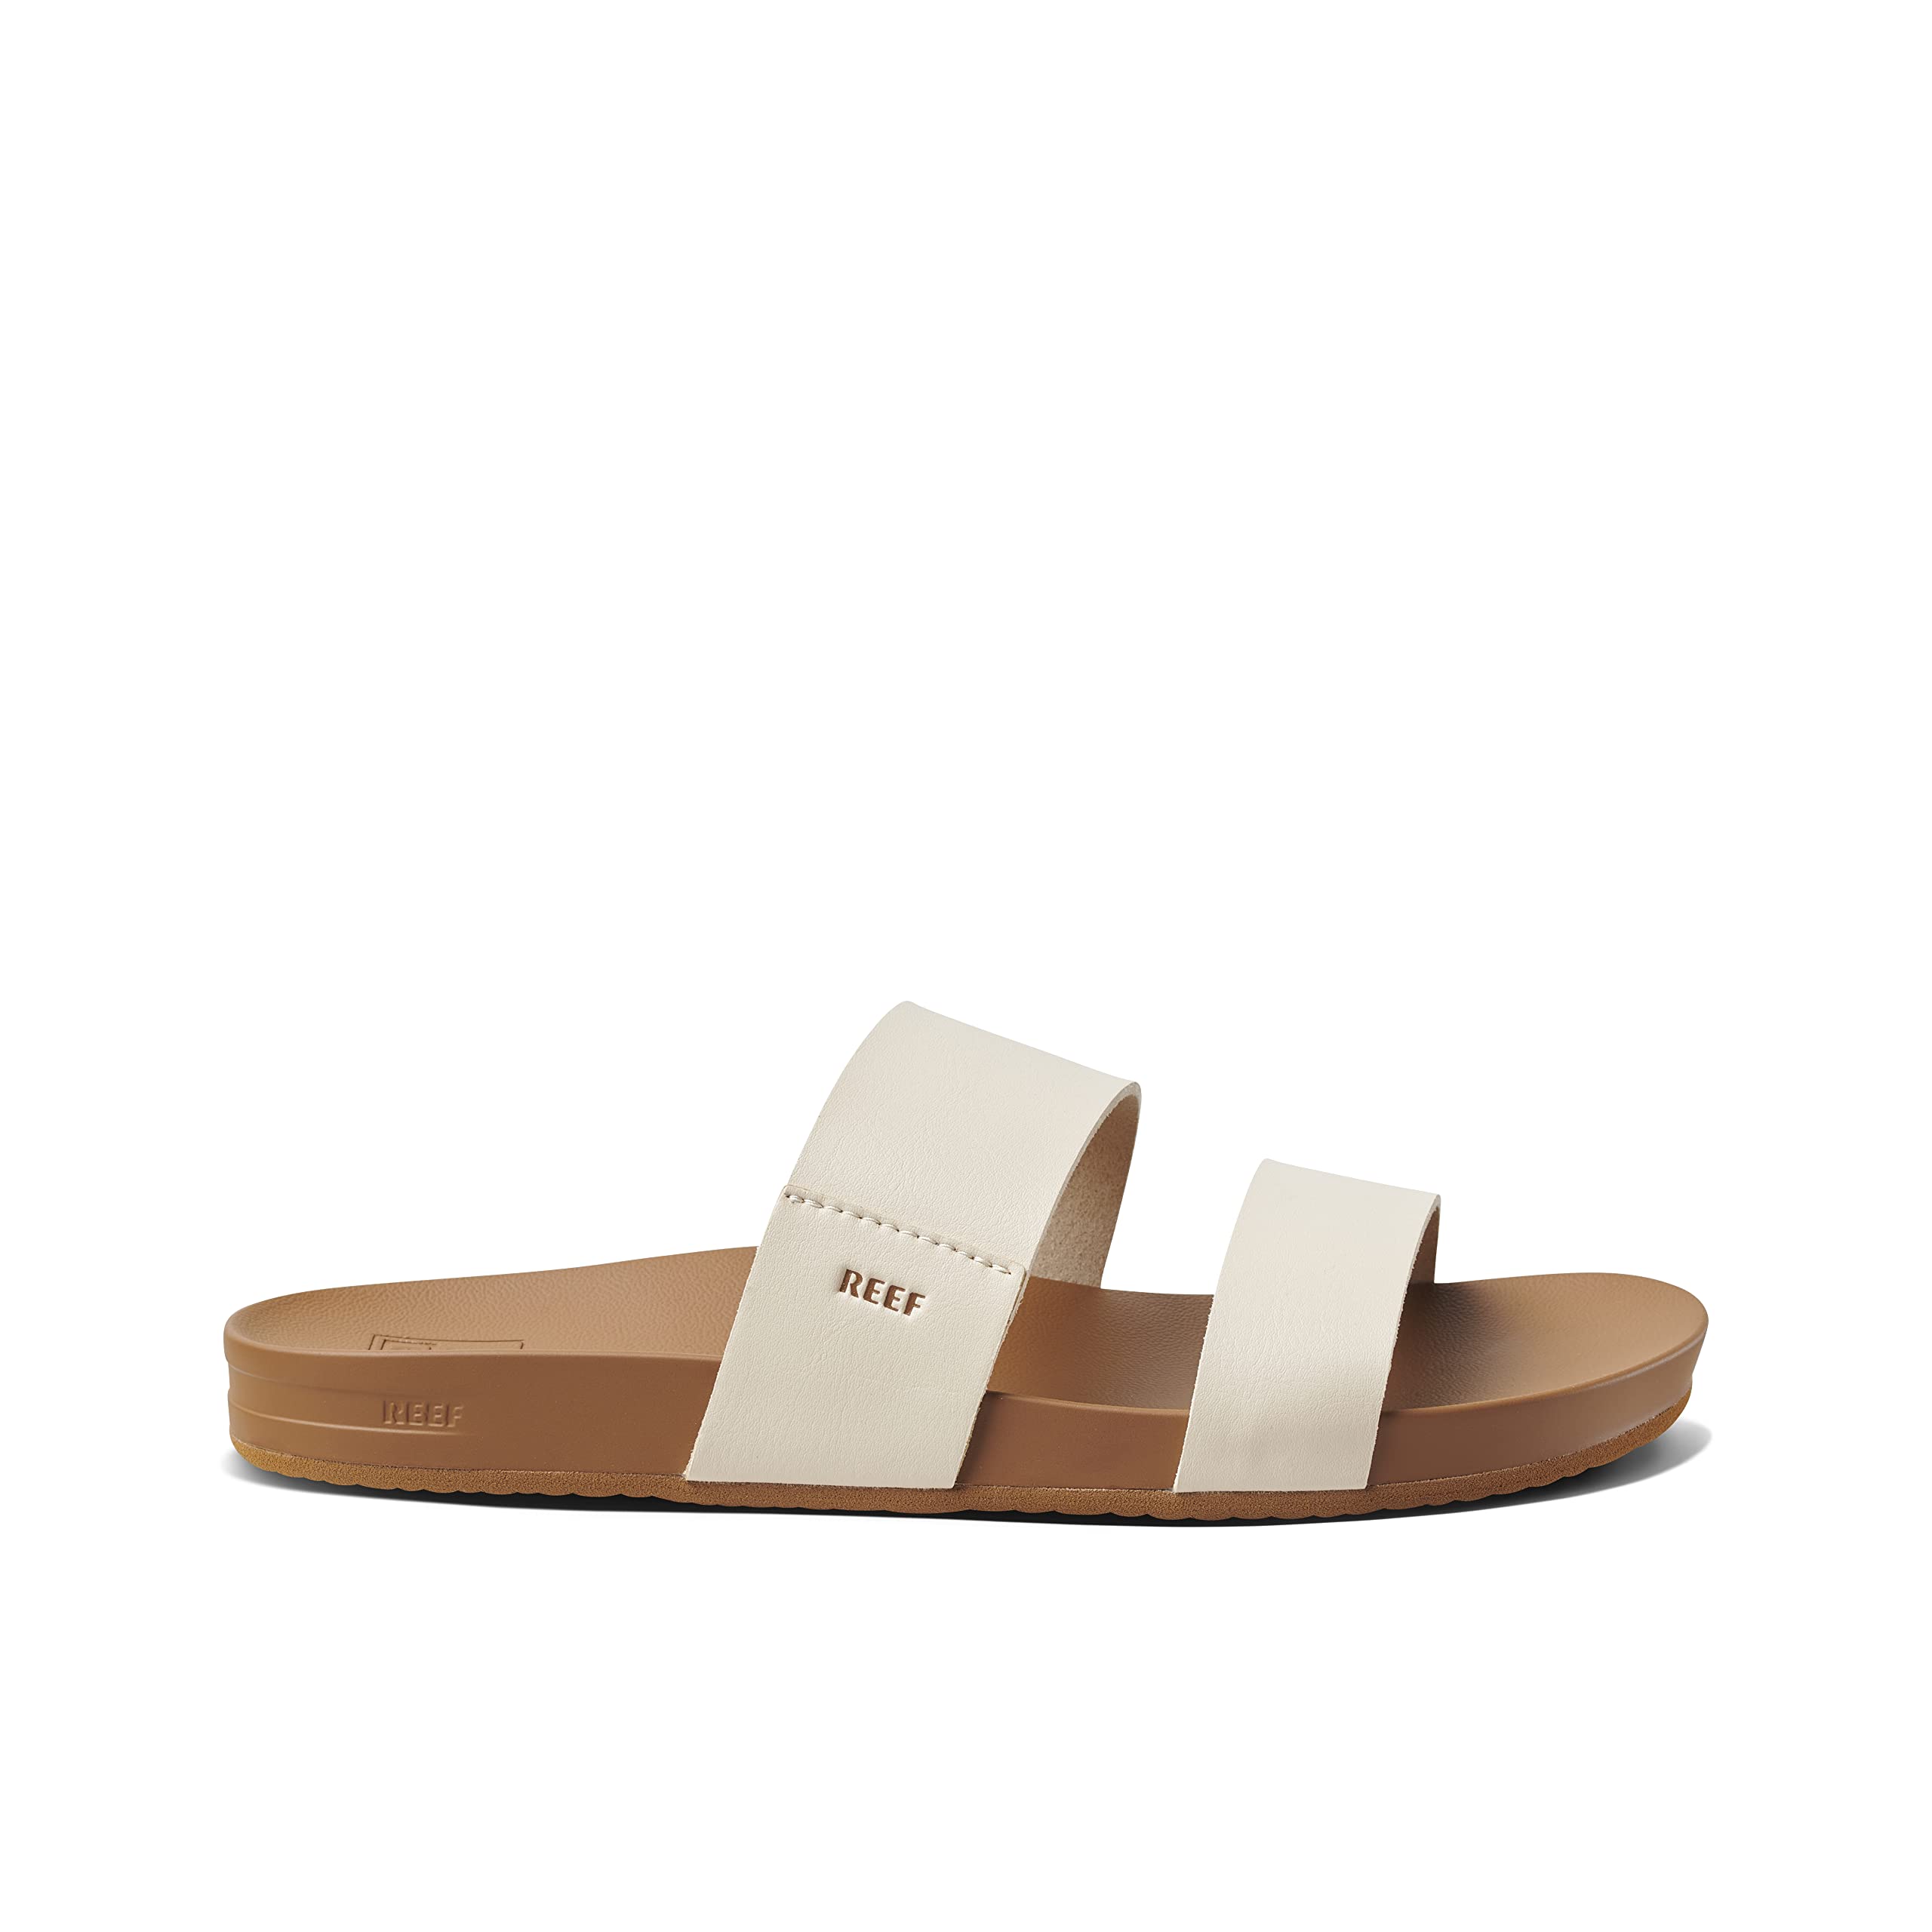 Reef Womens Sandals Vista | Vegan Leather Slides for Women With Cushion Bounce Footbed